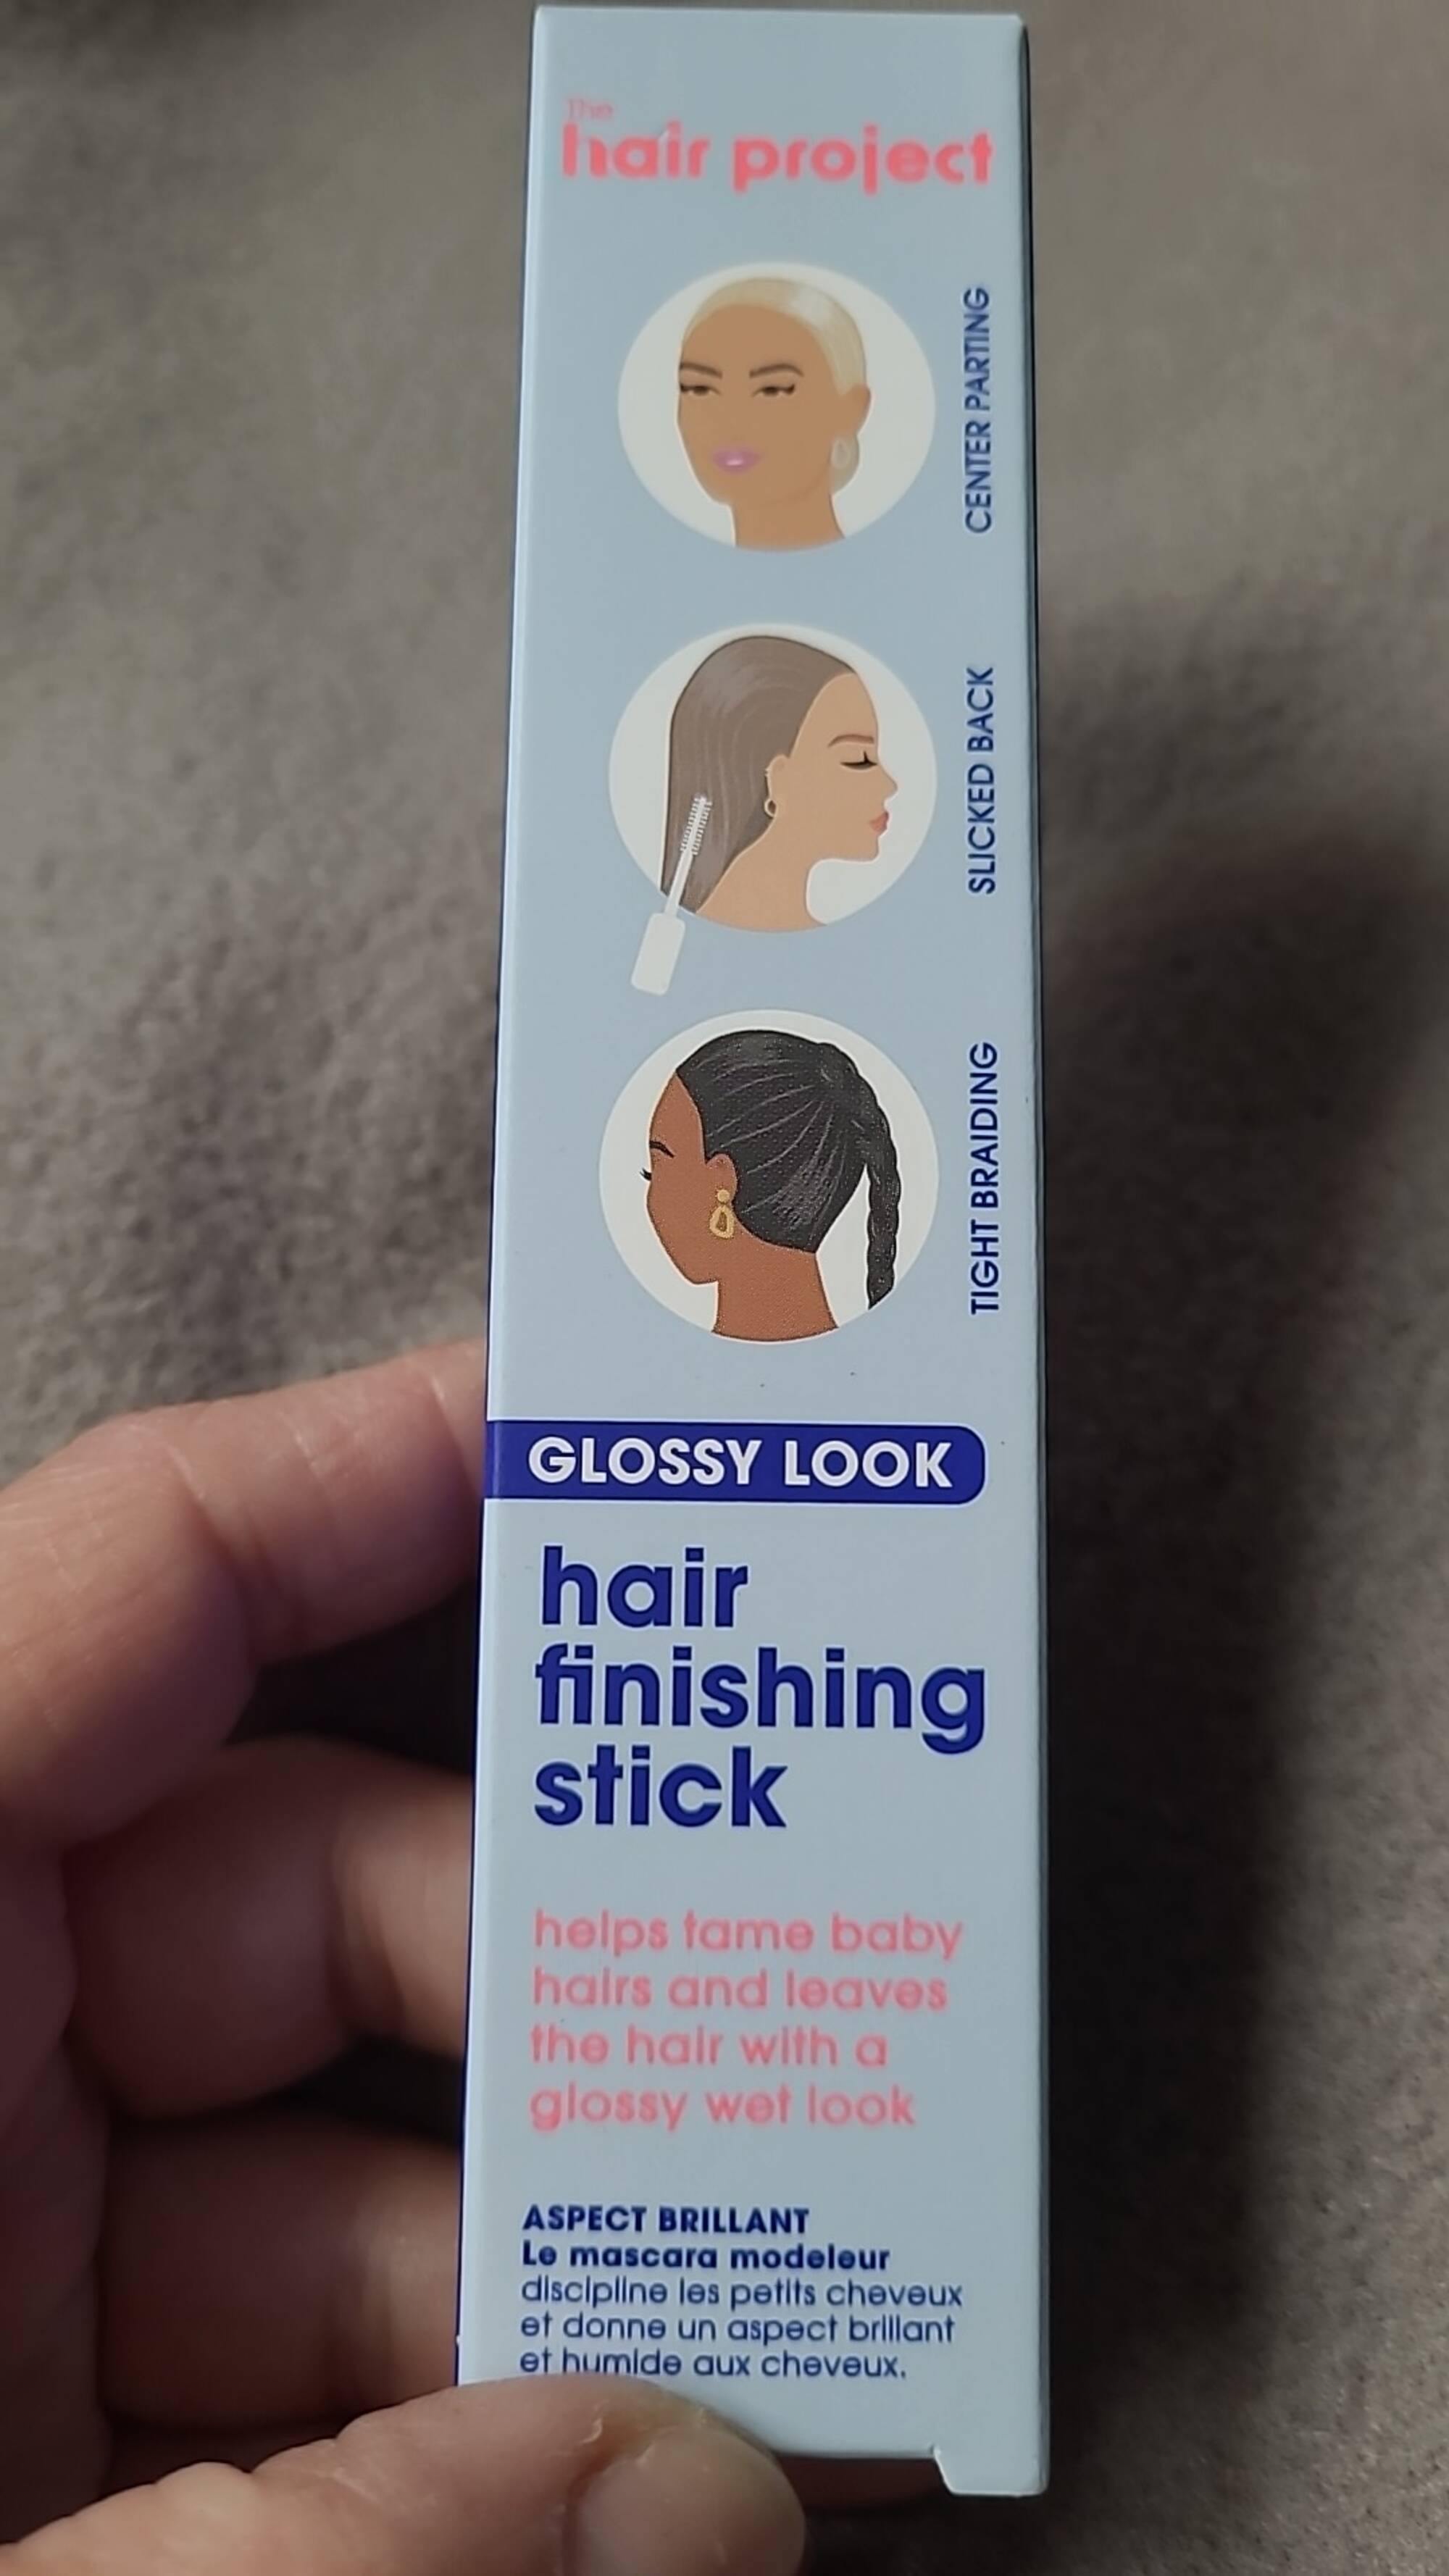 THE HAIR PROJECT - Glossy look - Hair finishing stick